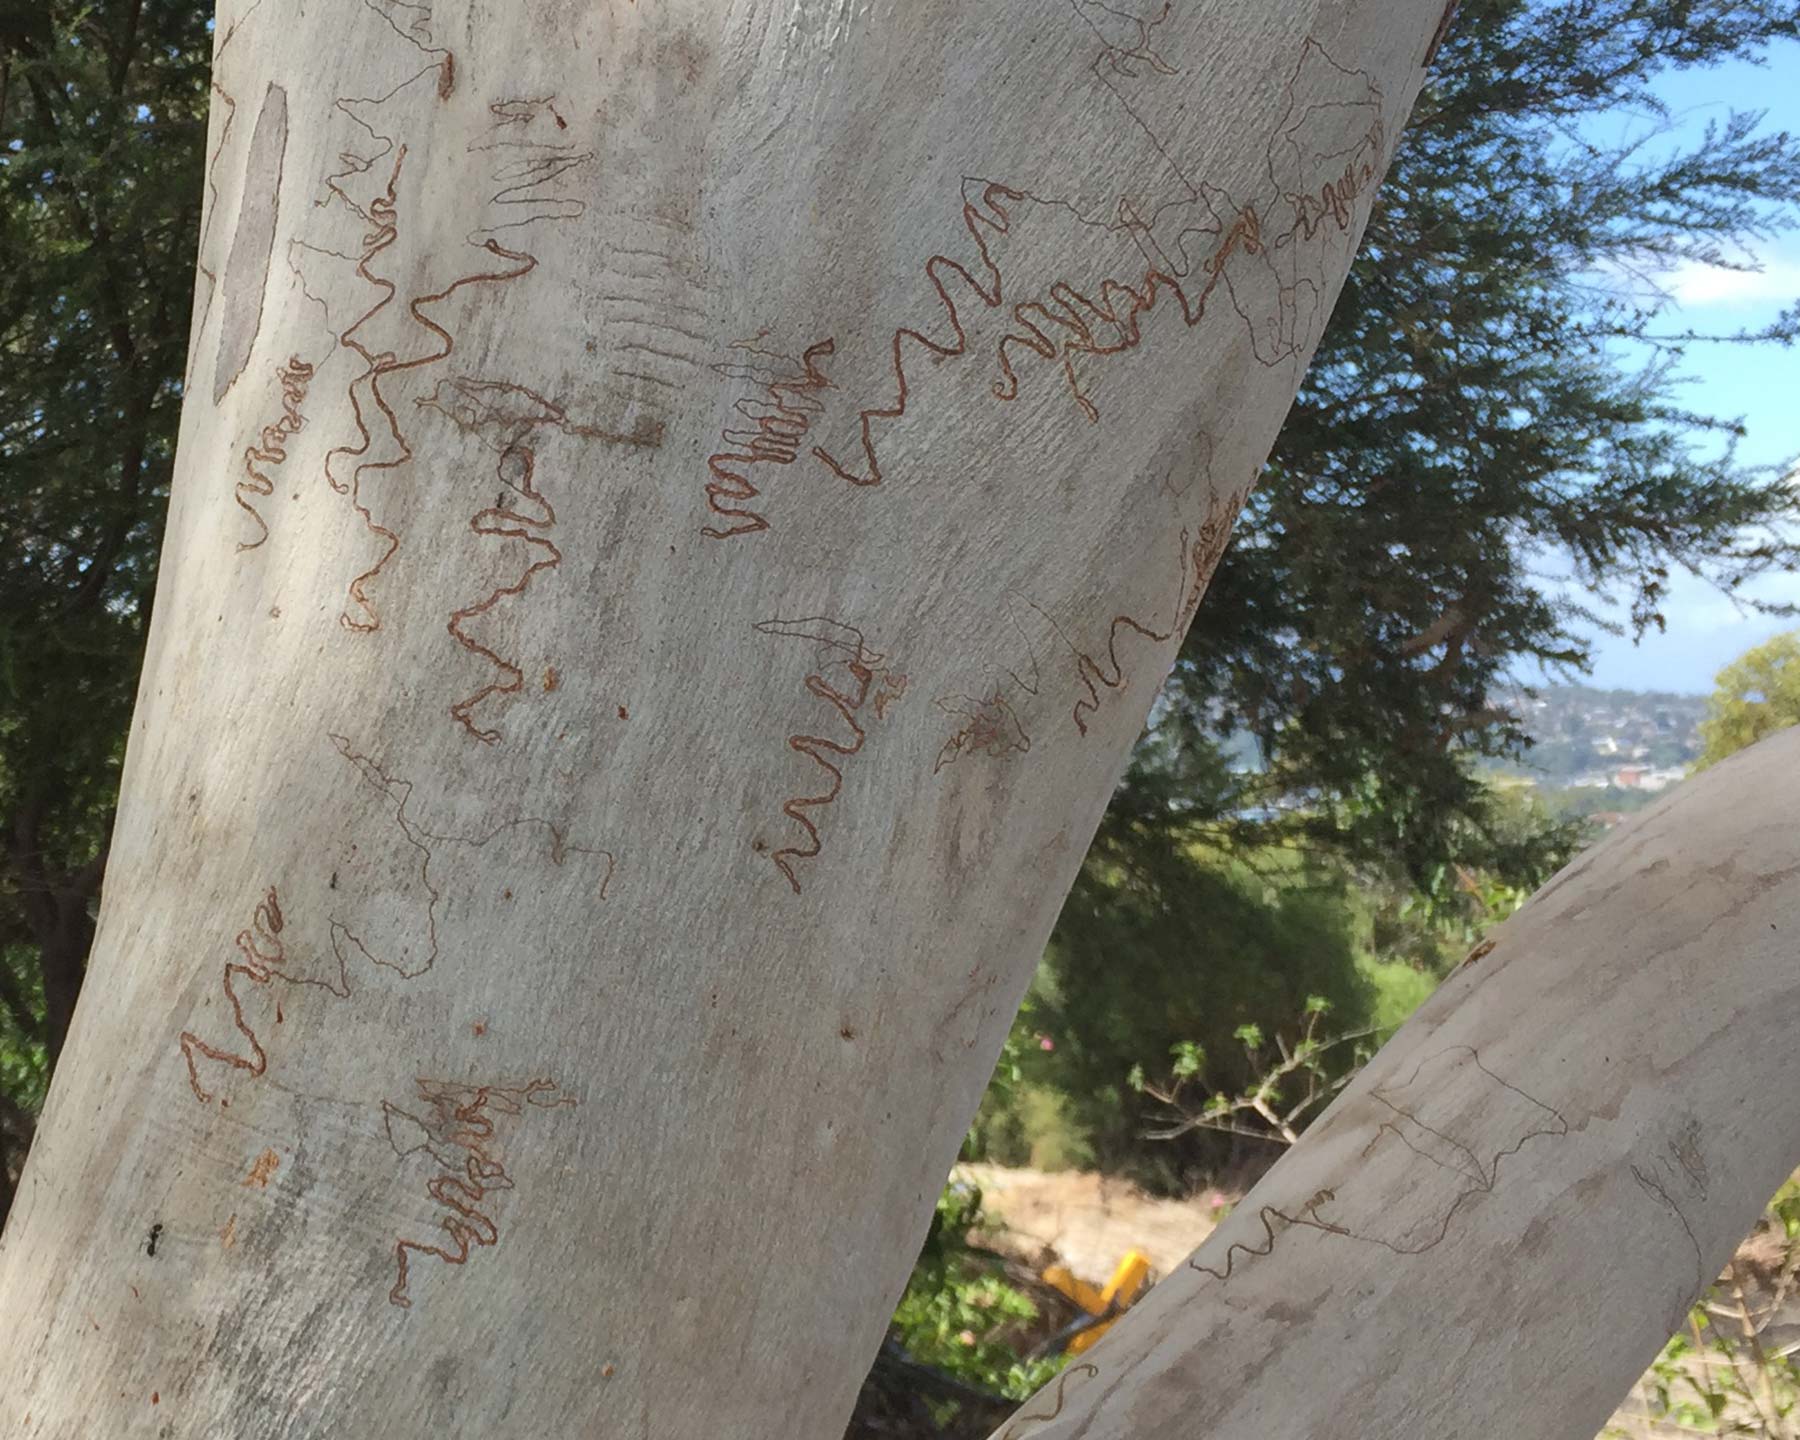 Eucalyptus haemastoma - Scribbles in bark caused by larvae of a small tunnelling moth